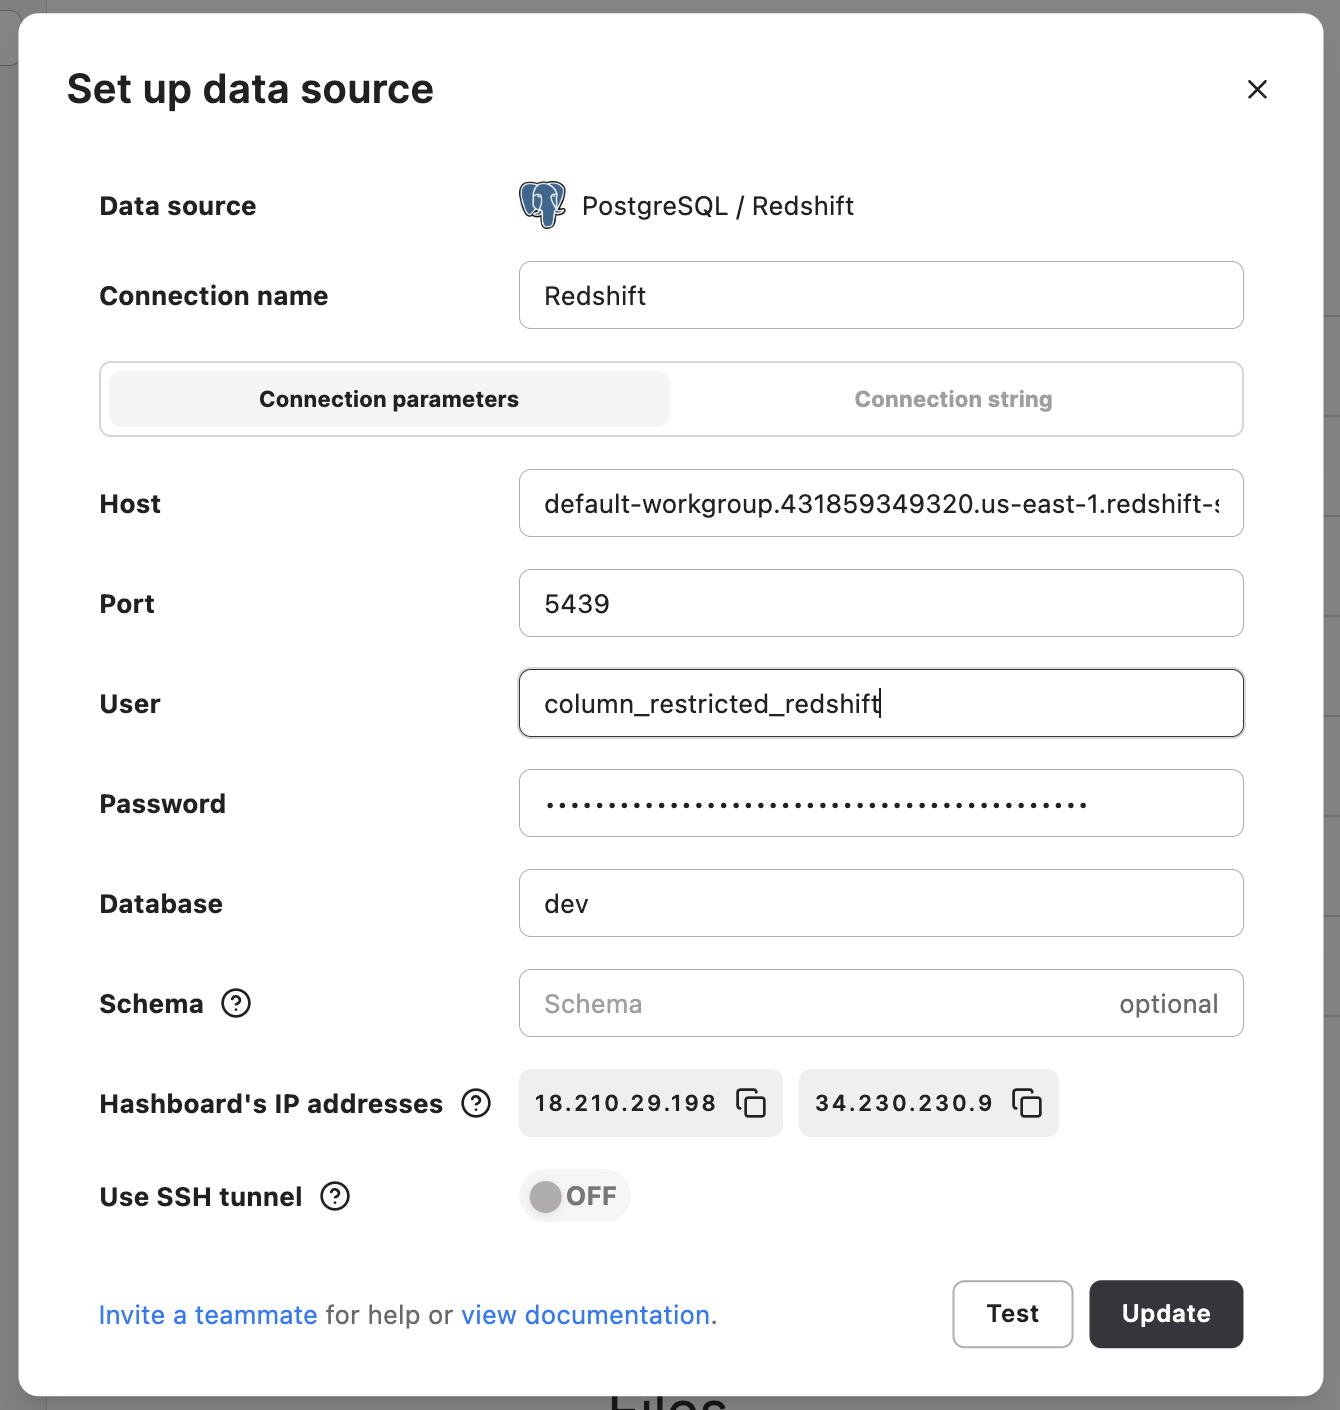 A Hashboard form titled "Set up data source" with fields filled out for a PostgreSQL/Redshift connection. The User field is column_restricted_redshift.